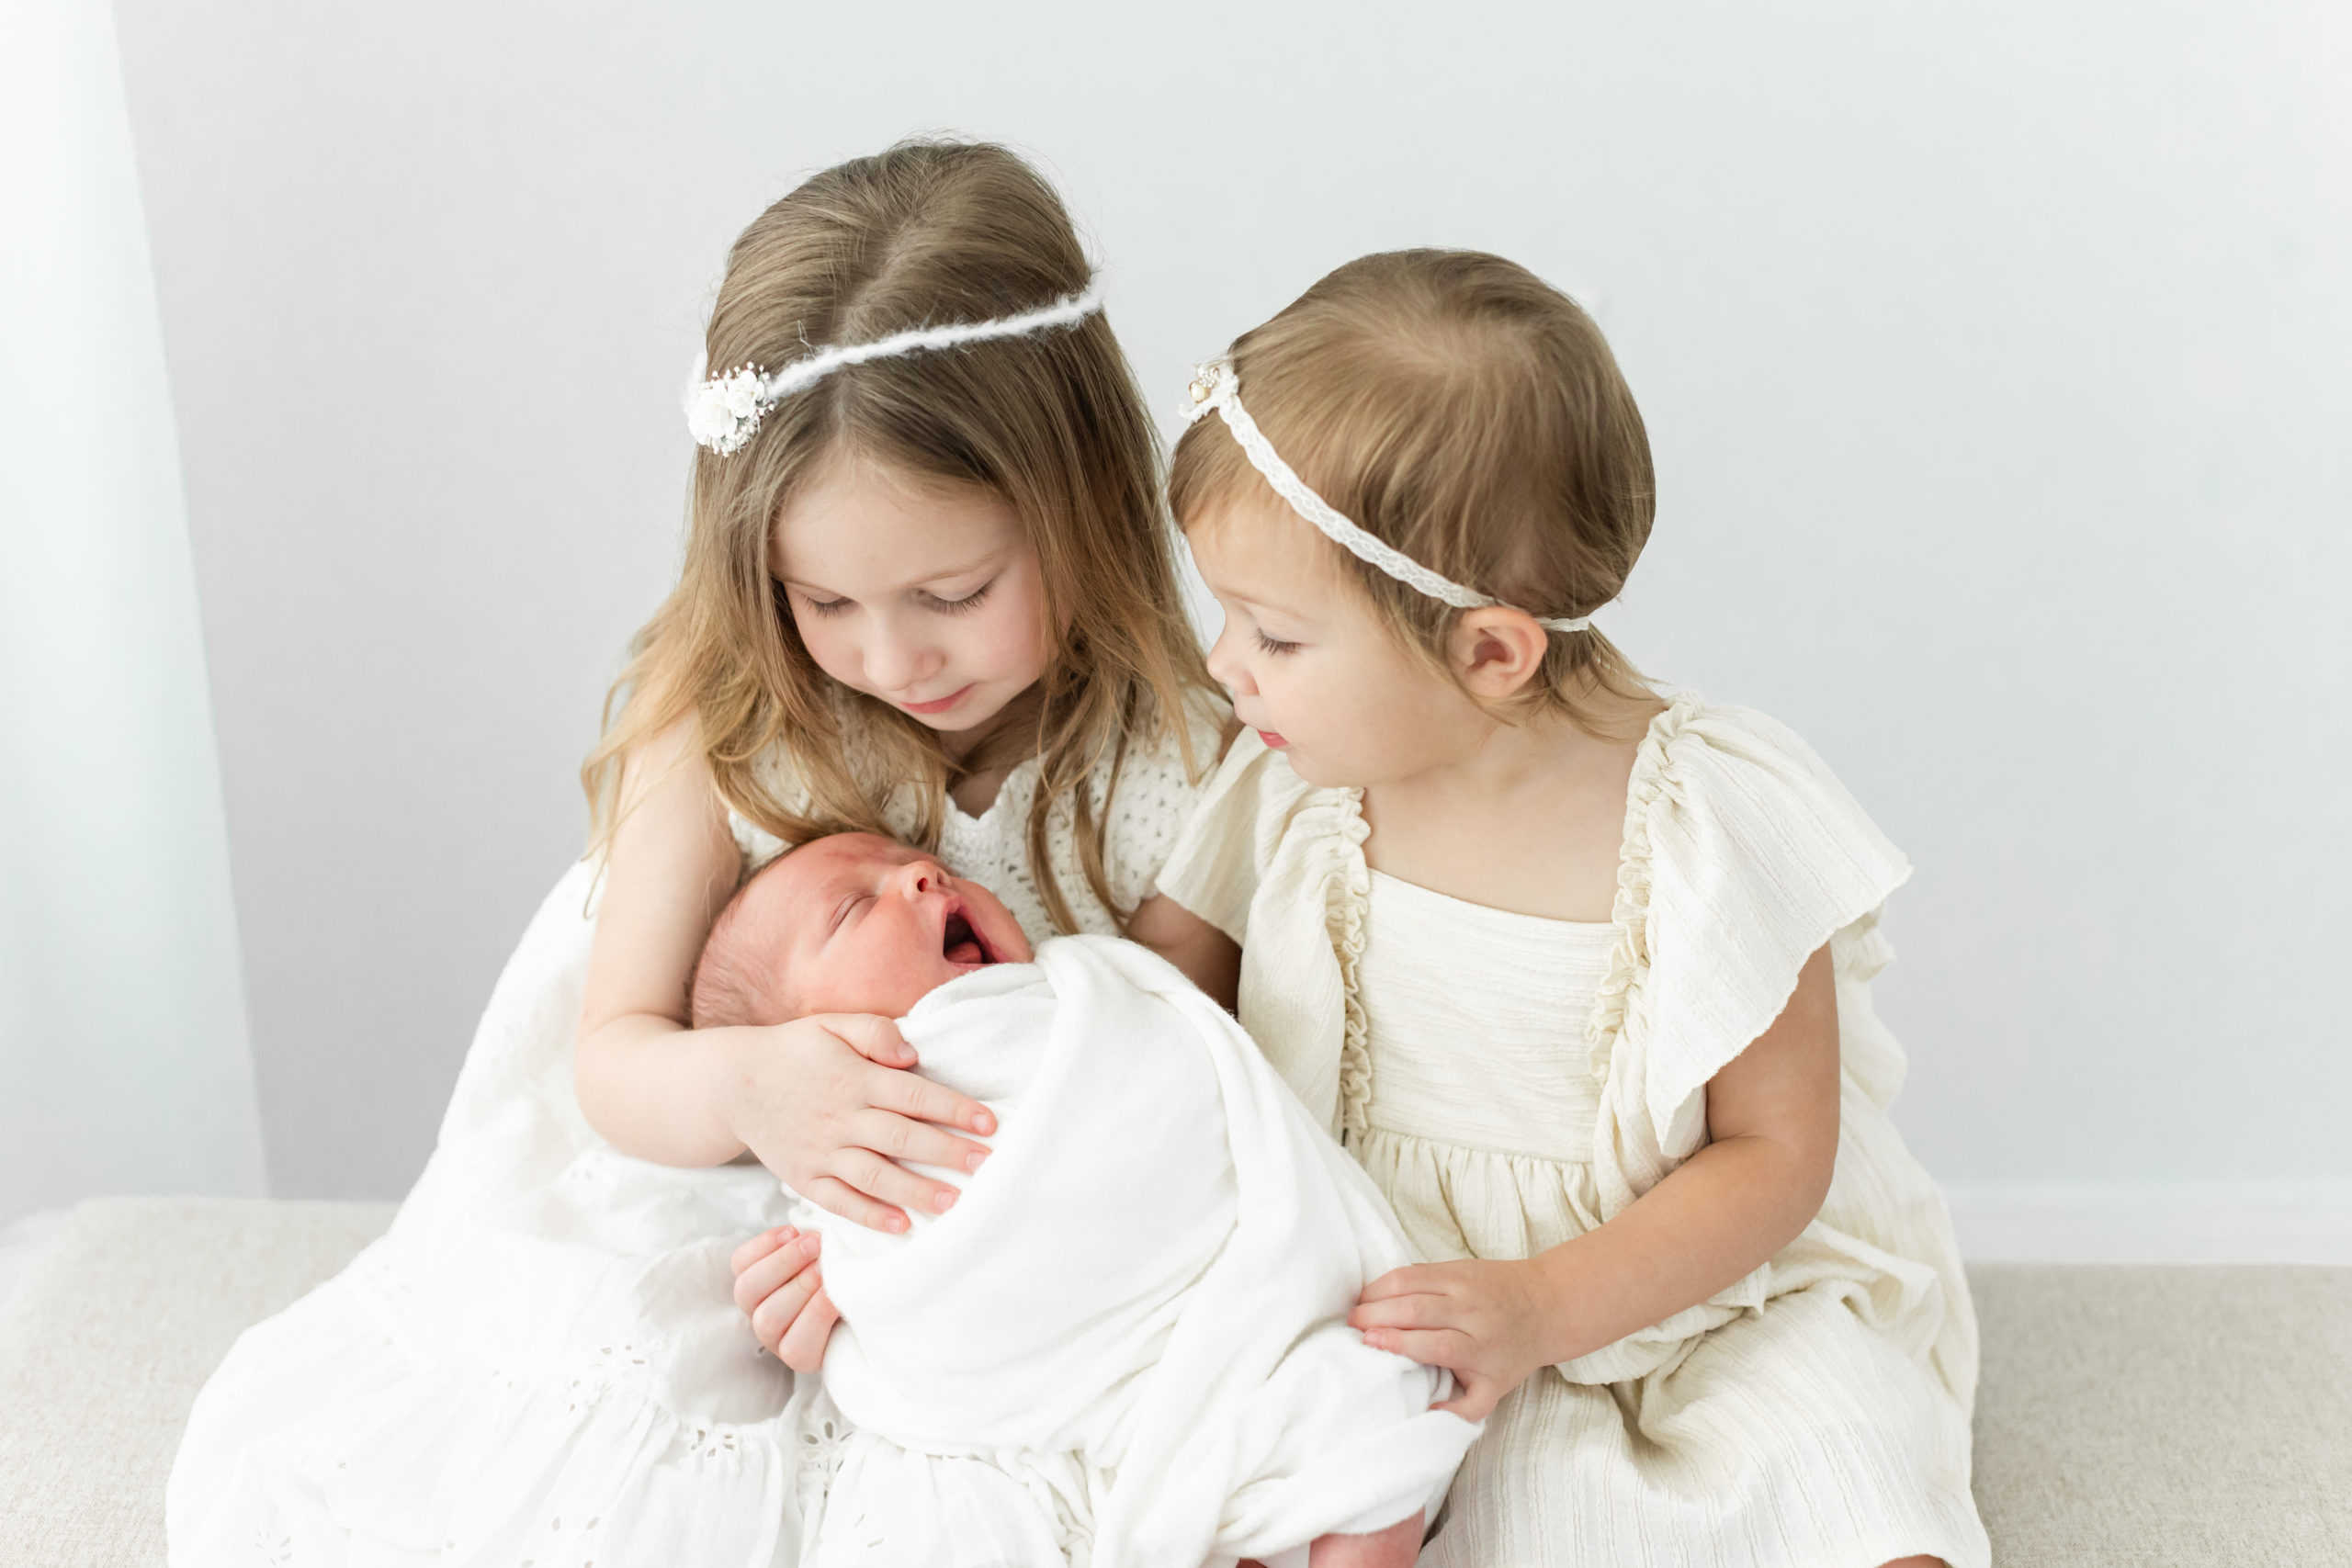 Monette Anne Photography captures two sweet older sisters loving on their brand new baby brother in a clean antique studio in Houston, Texas. sibling photo little brothers #monetteannephotography #monetteannenewbornphotography #monetteannefamilyphotography #houstonfamilyphotographer #houstonnewbornphotographer #familyoffive #babybrother #siblingpictures #oldersisters #threekids #photographywardrobe #montrossestudio